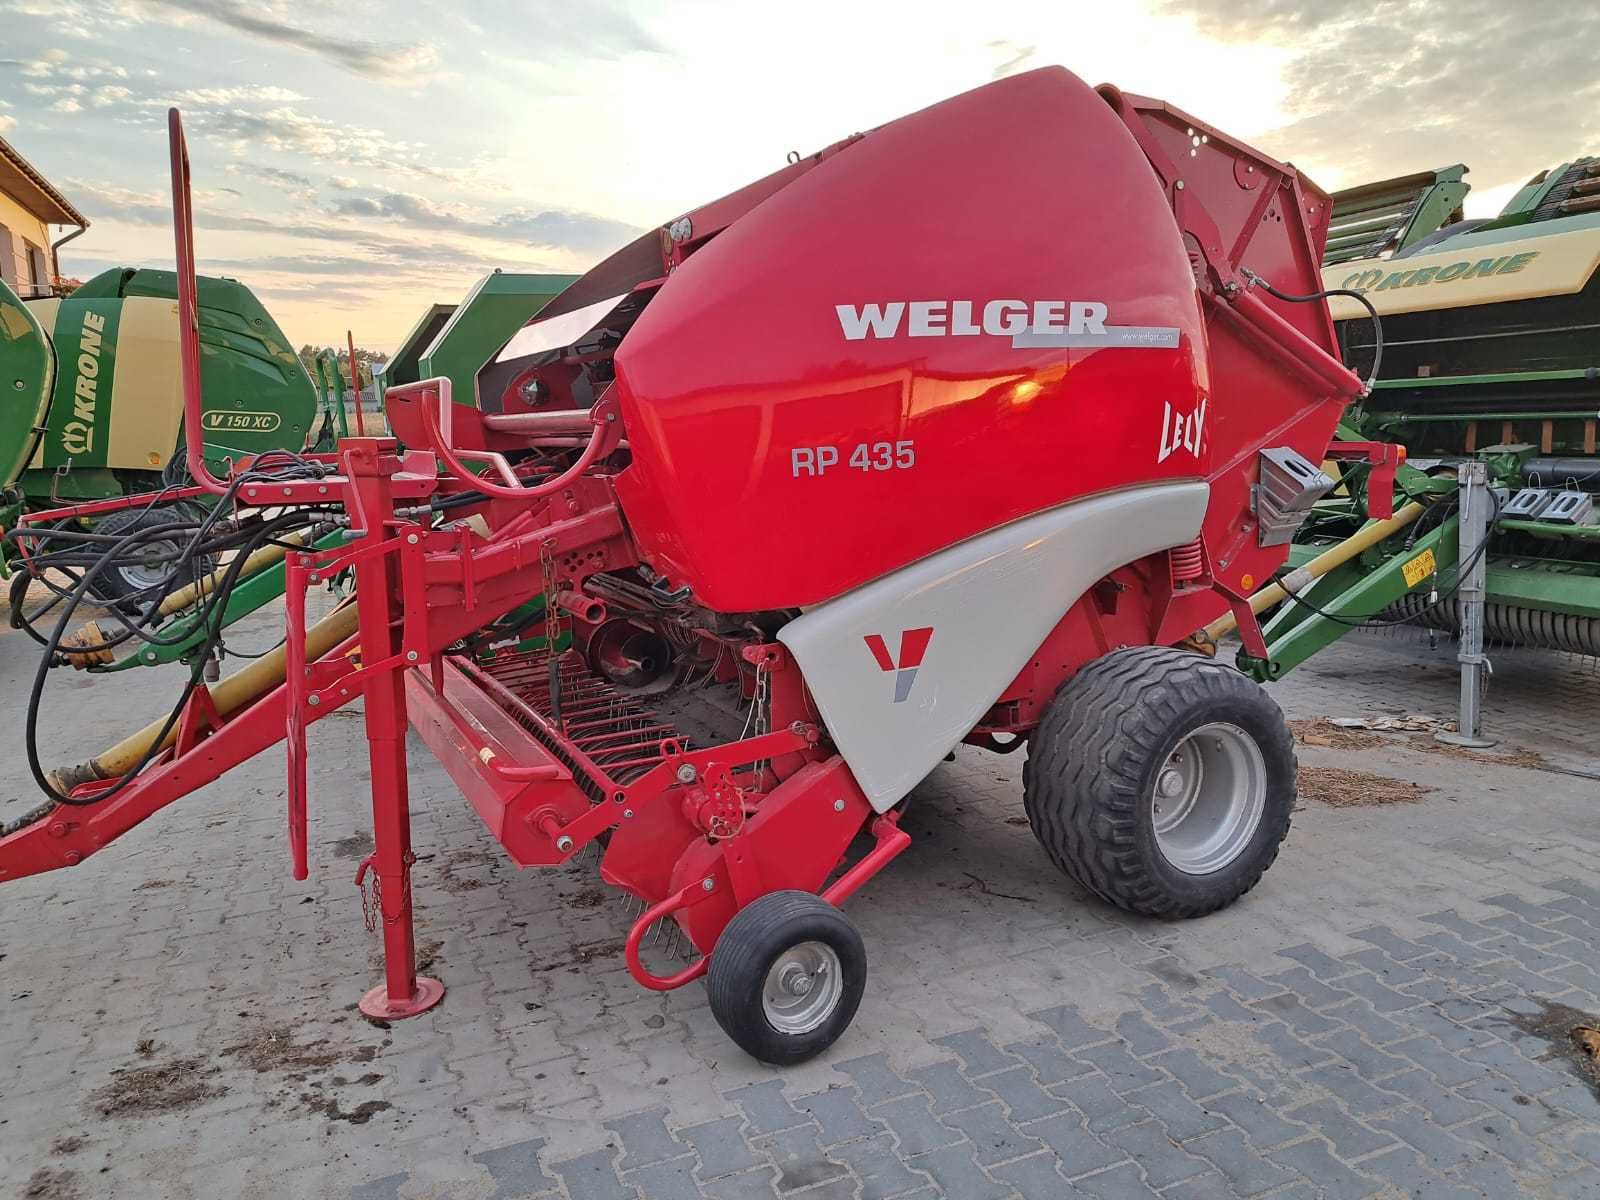 Welger Lely RP435  rotor noże Laleczka